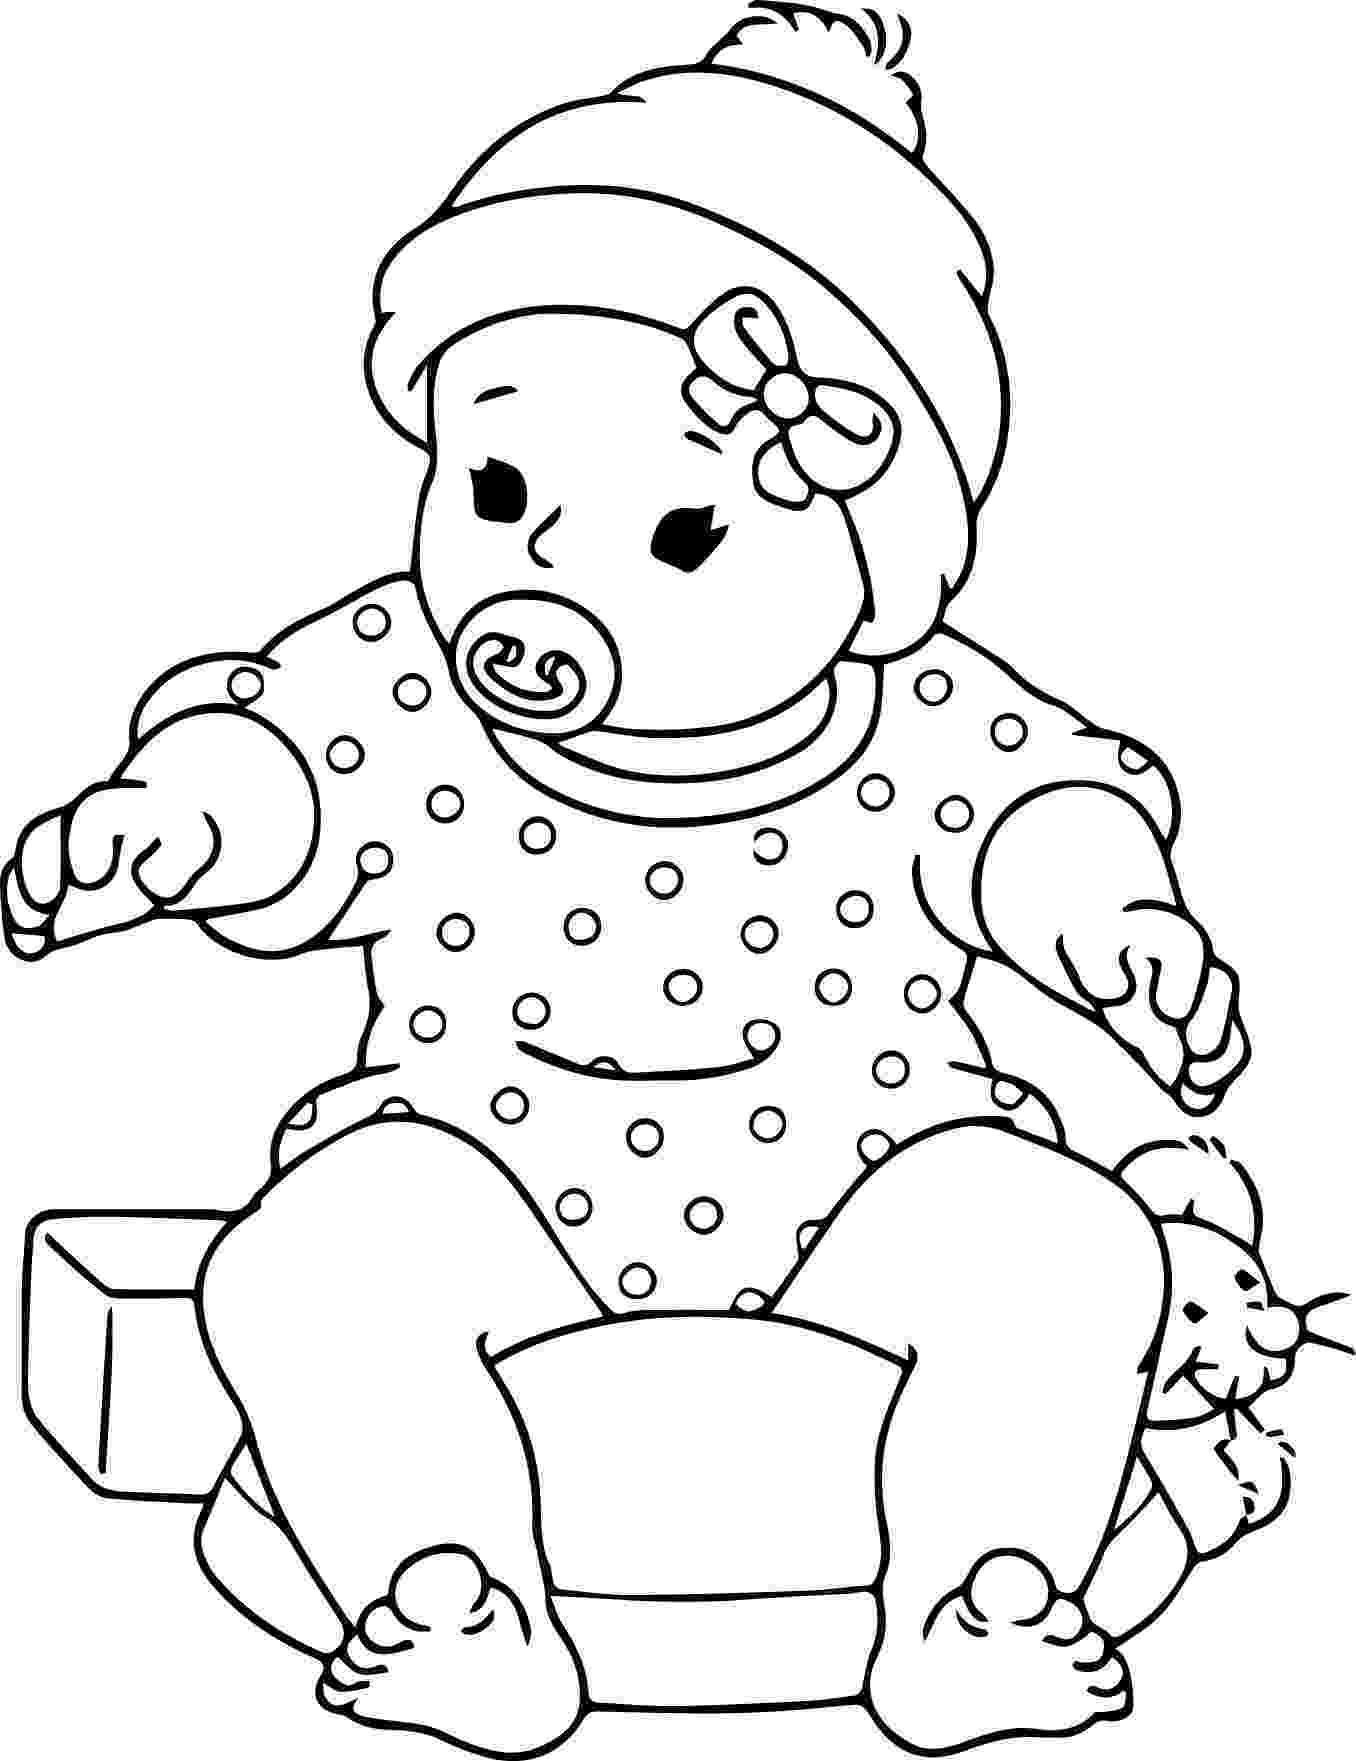 dolls coloring pages free printable baby doll coloring pages throughout inside coloring dolls pages 